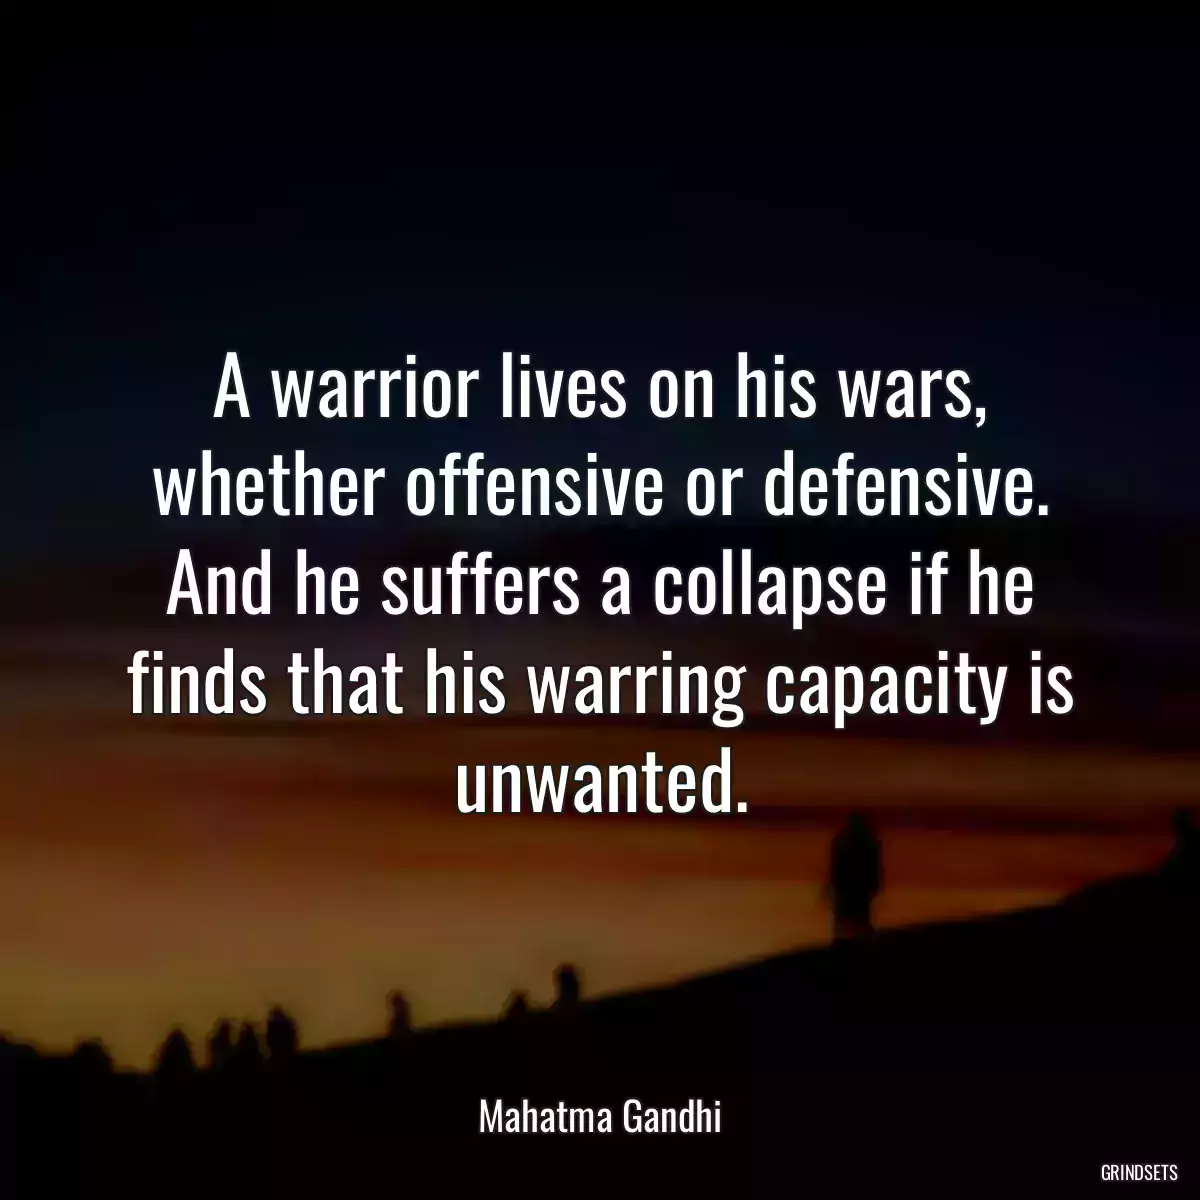 A warrior lives on his wars, whether offensive or defensive. And he suffers a collapse if he finds that his warring capacity is unwanted.